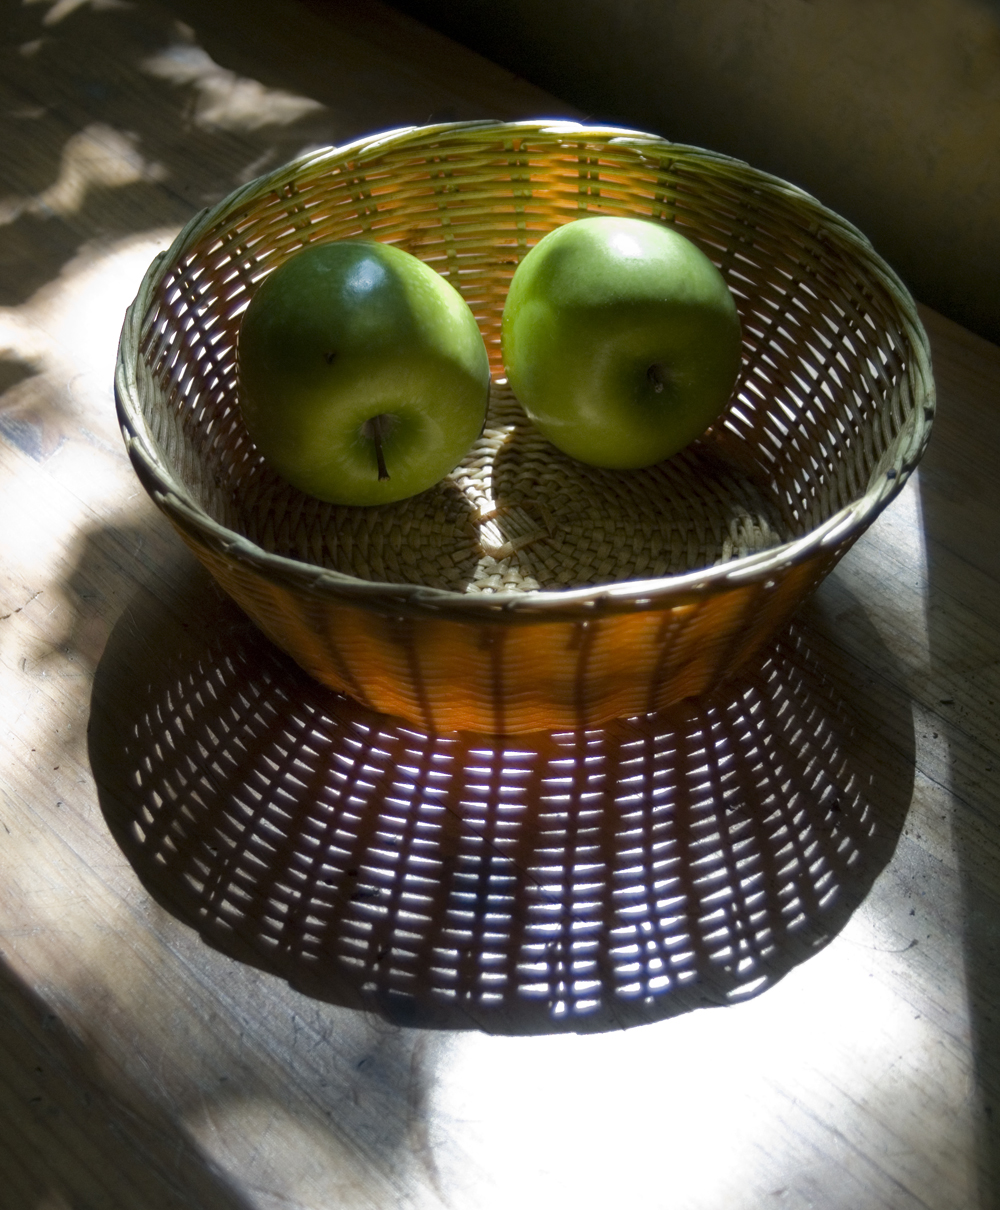 photo of apples in a basket